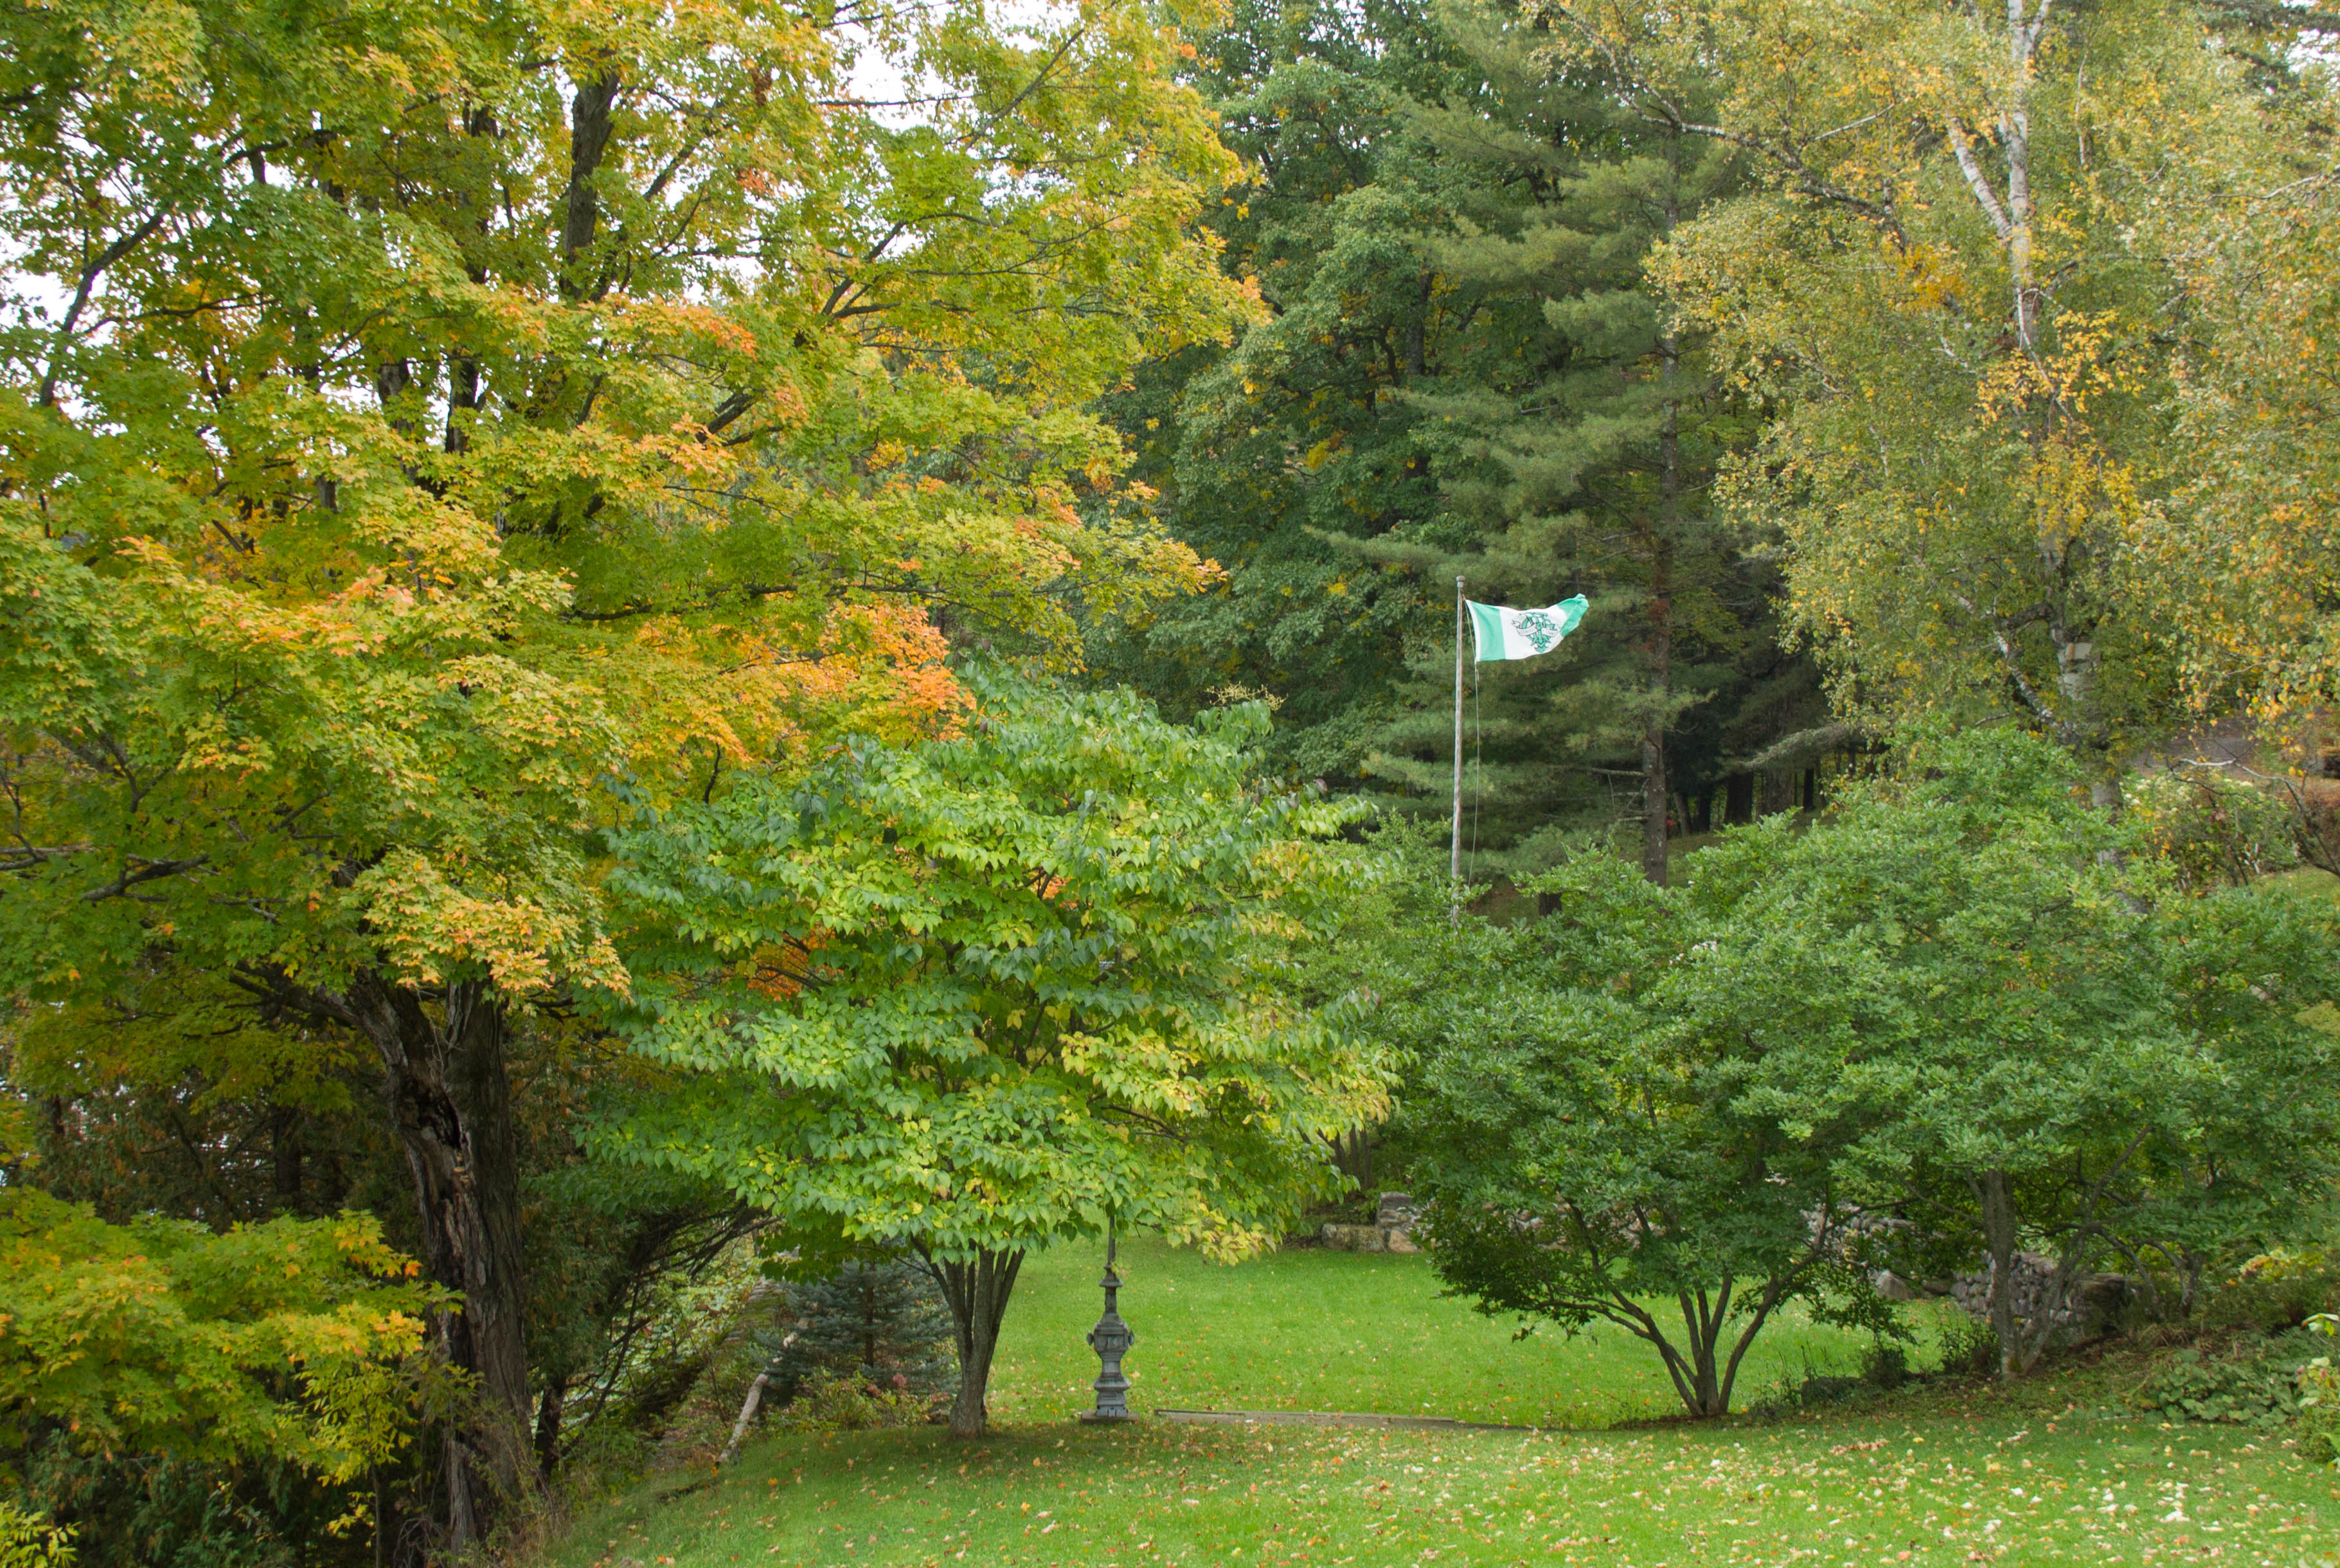 A few weeks ago, the trees had only begun to change colour. The Glen Villa flag flies proudly above the Lower Garden.